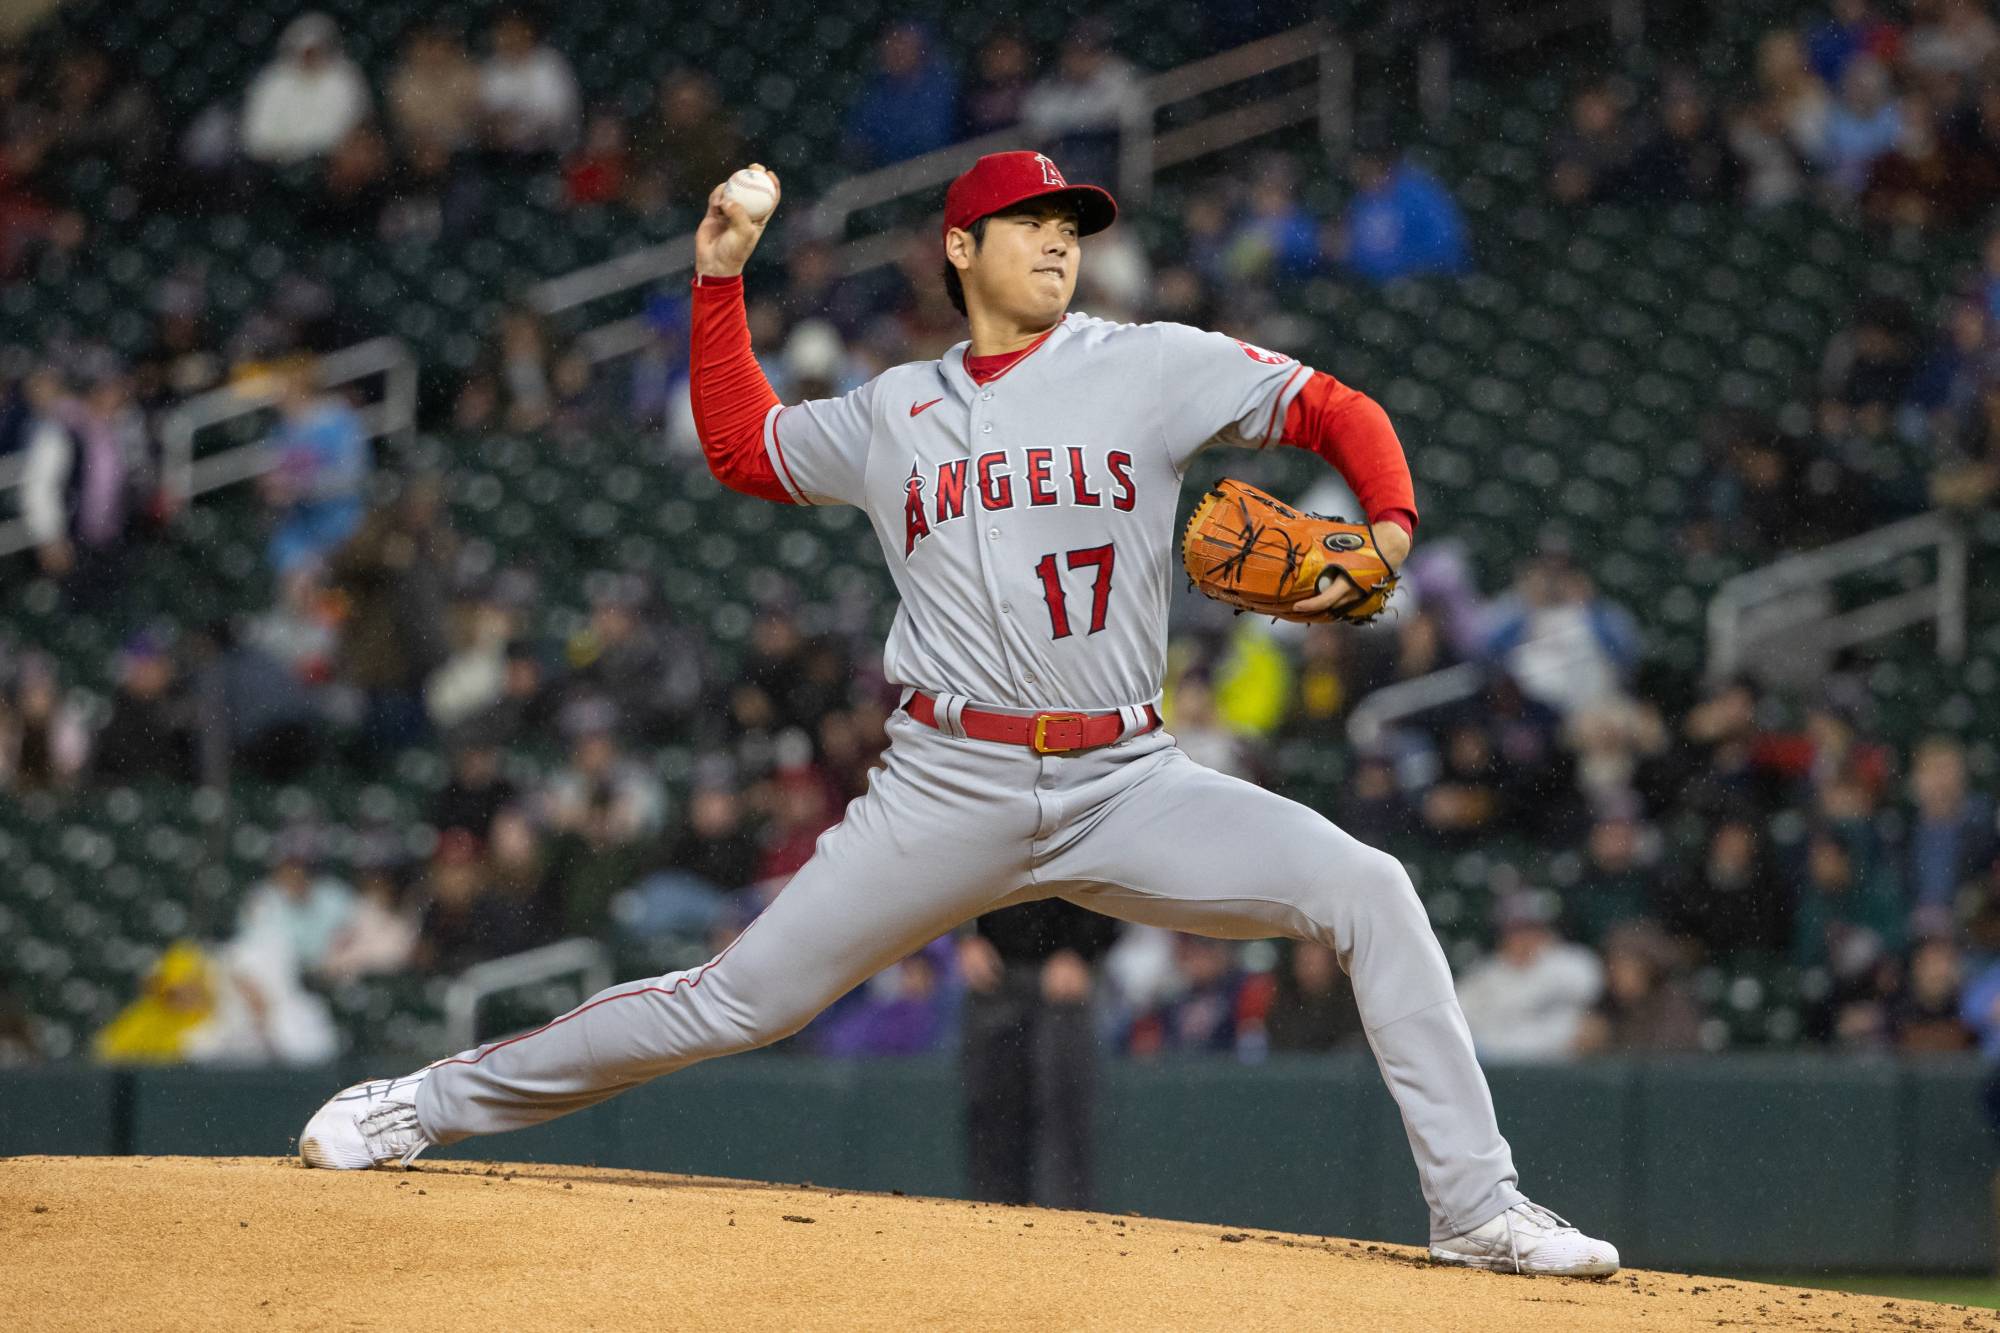 Shohei Ohtani logs 200th strikeout and 14th win as Angels beat Twins